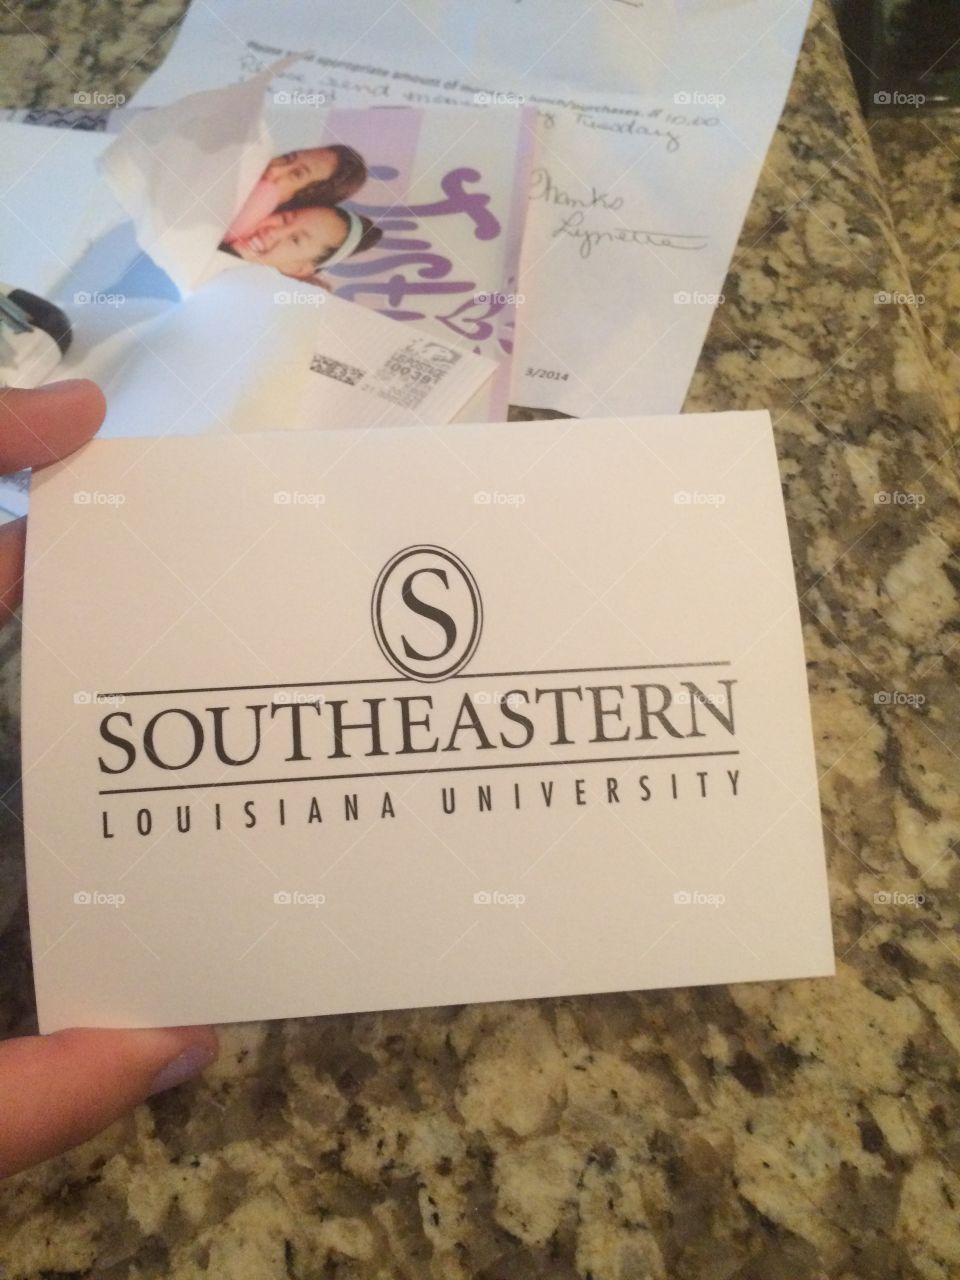 South Eastern University. I got a letter from them thanking me for coming to their on campus testing for HS classes. I was chosen for Spanish.